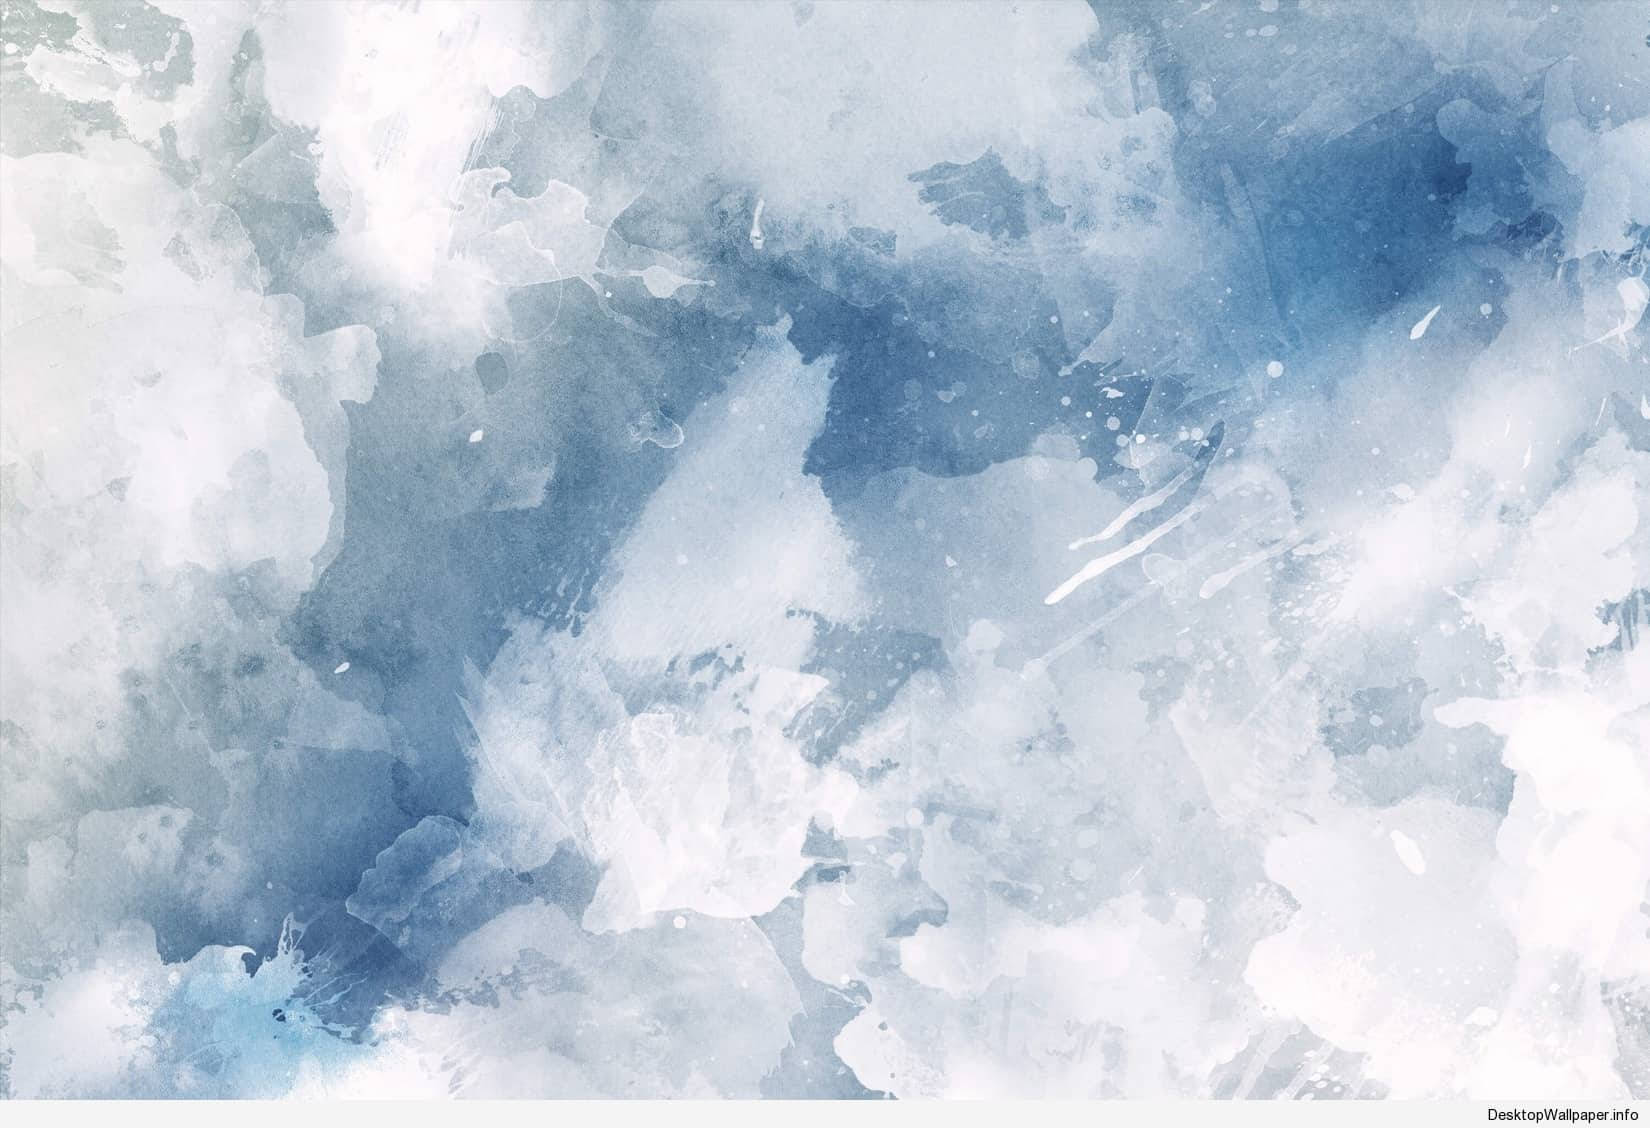 Blue Clouds Abstract Watercolor Art Wallpaper